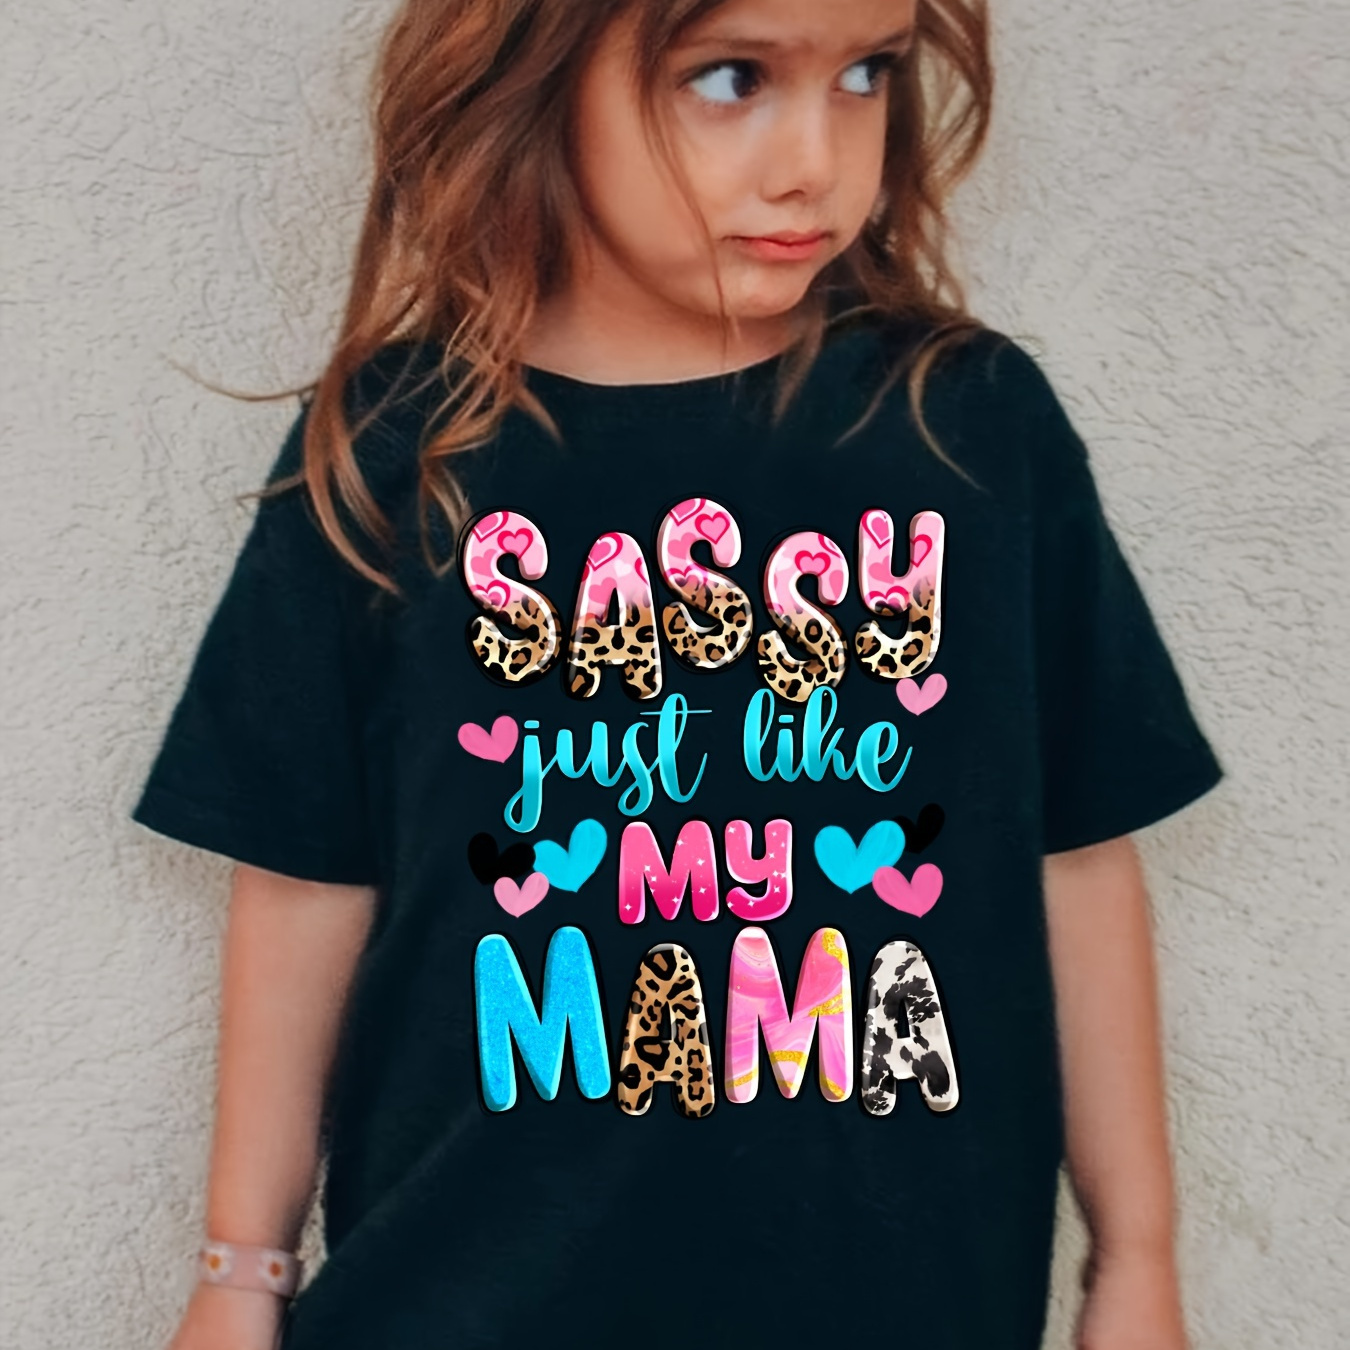 

Sassy Just Like My Mama & Hearts Graphic Print, Girls' Casual Comfy Crew Neck Short Sleeve T-shirt For Spring And Summer, Girls' Clothes For Outdoor Activities